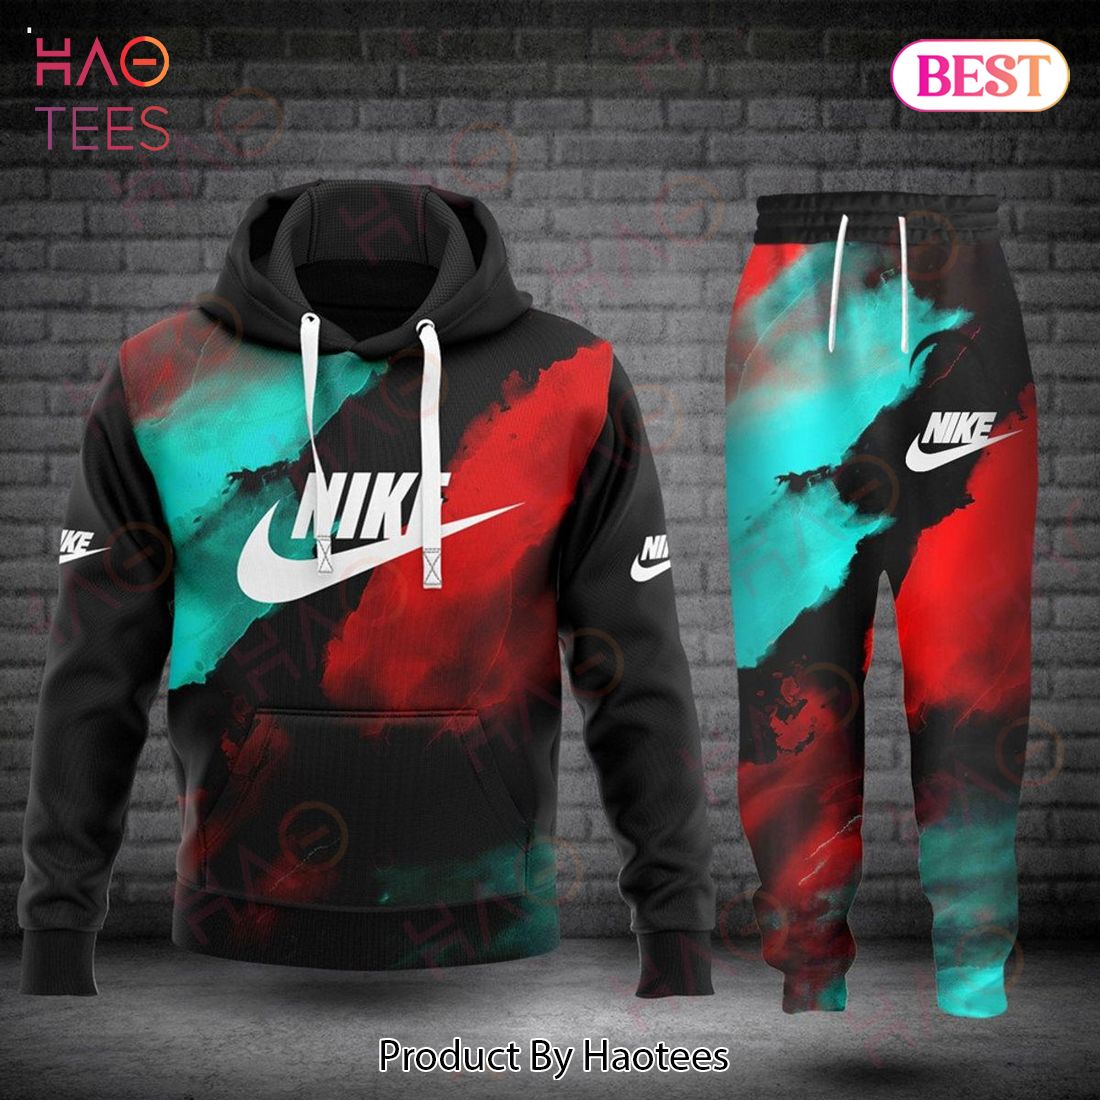 Nike Tie Dye Black Red Blue Color Luxury Brand Hoodie And Pants Limited Edition